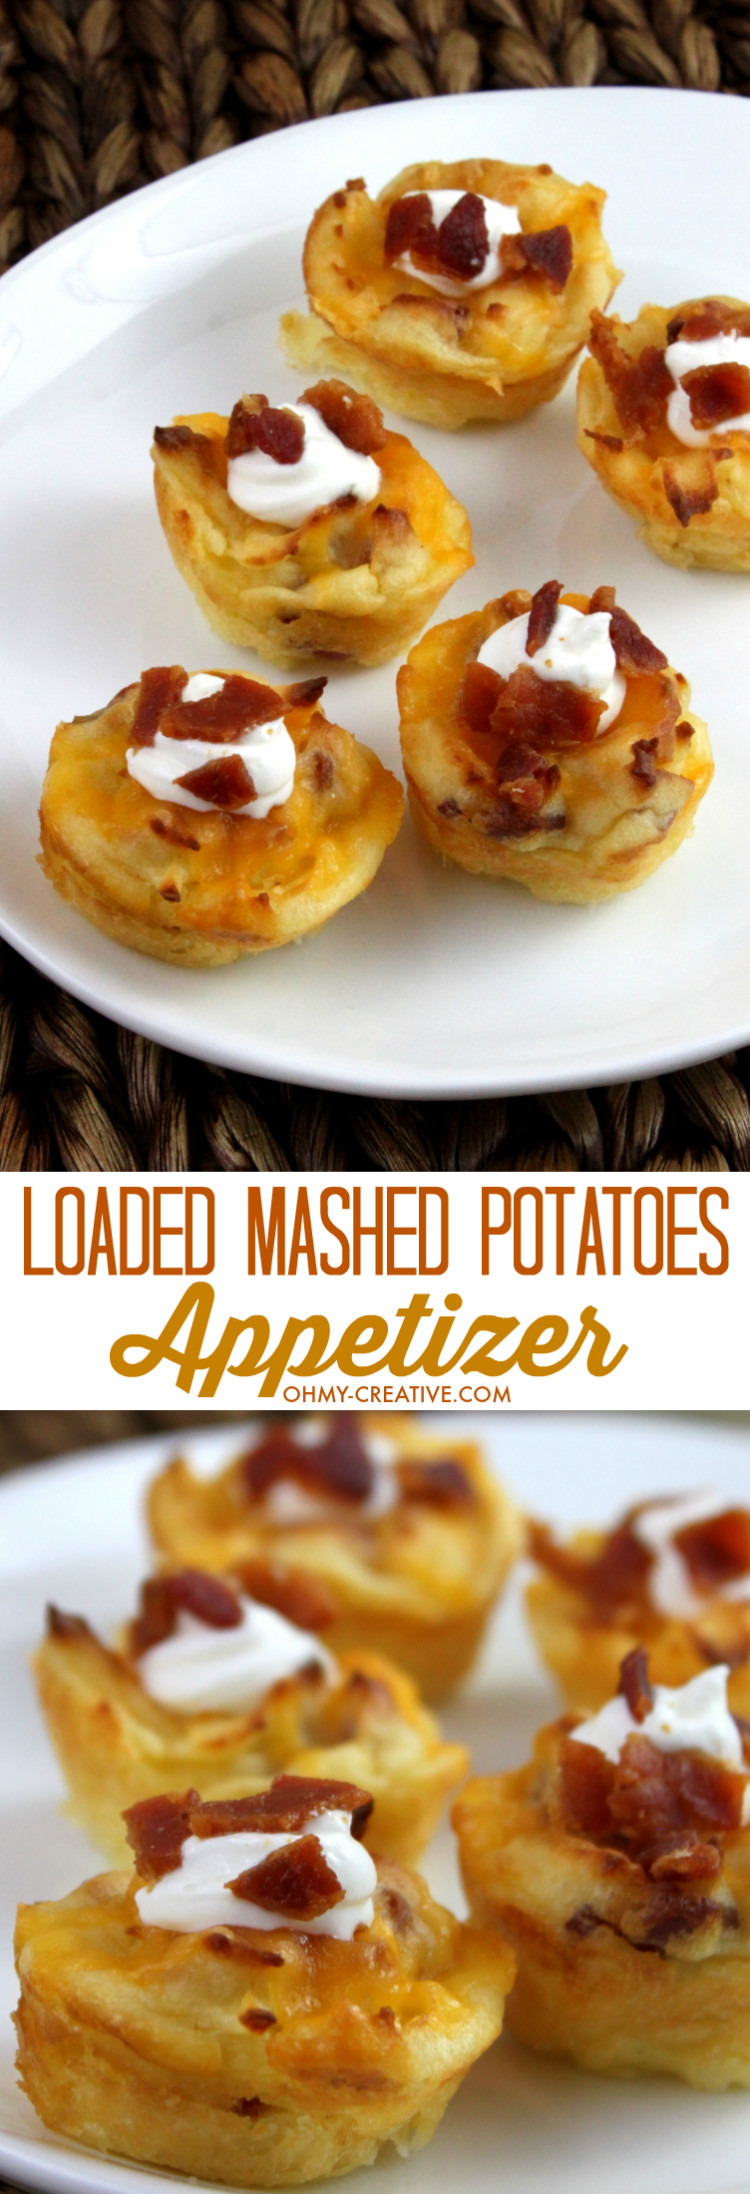 Mashed Potatoes Appetizers
 Loaded Mashed Potatoes Appetizer Bites Oh My Creative